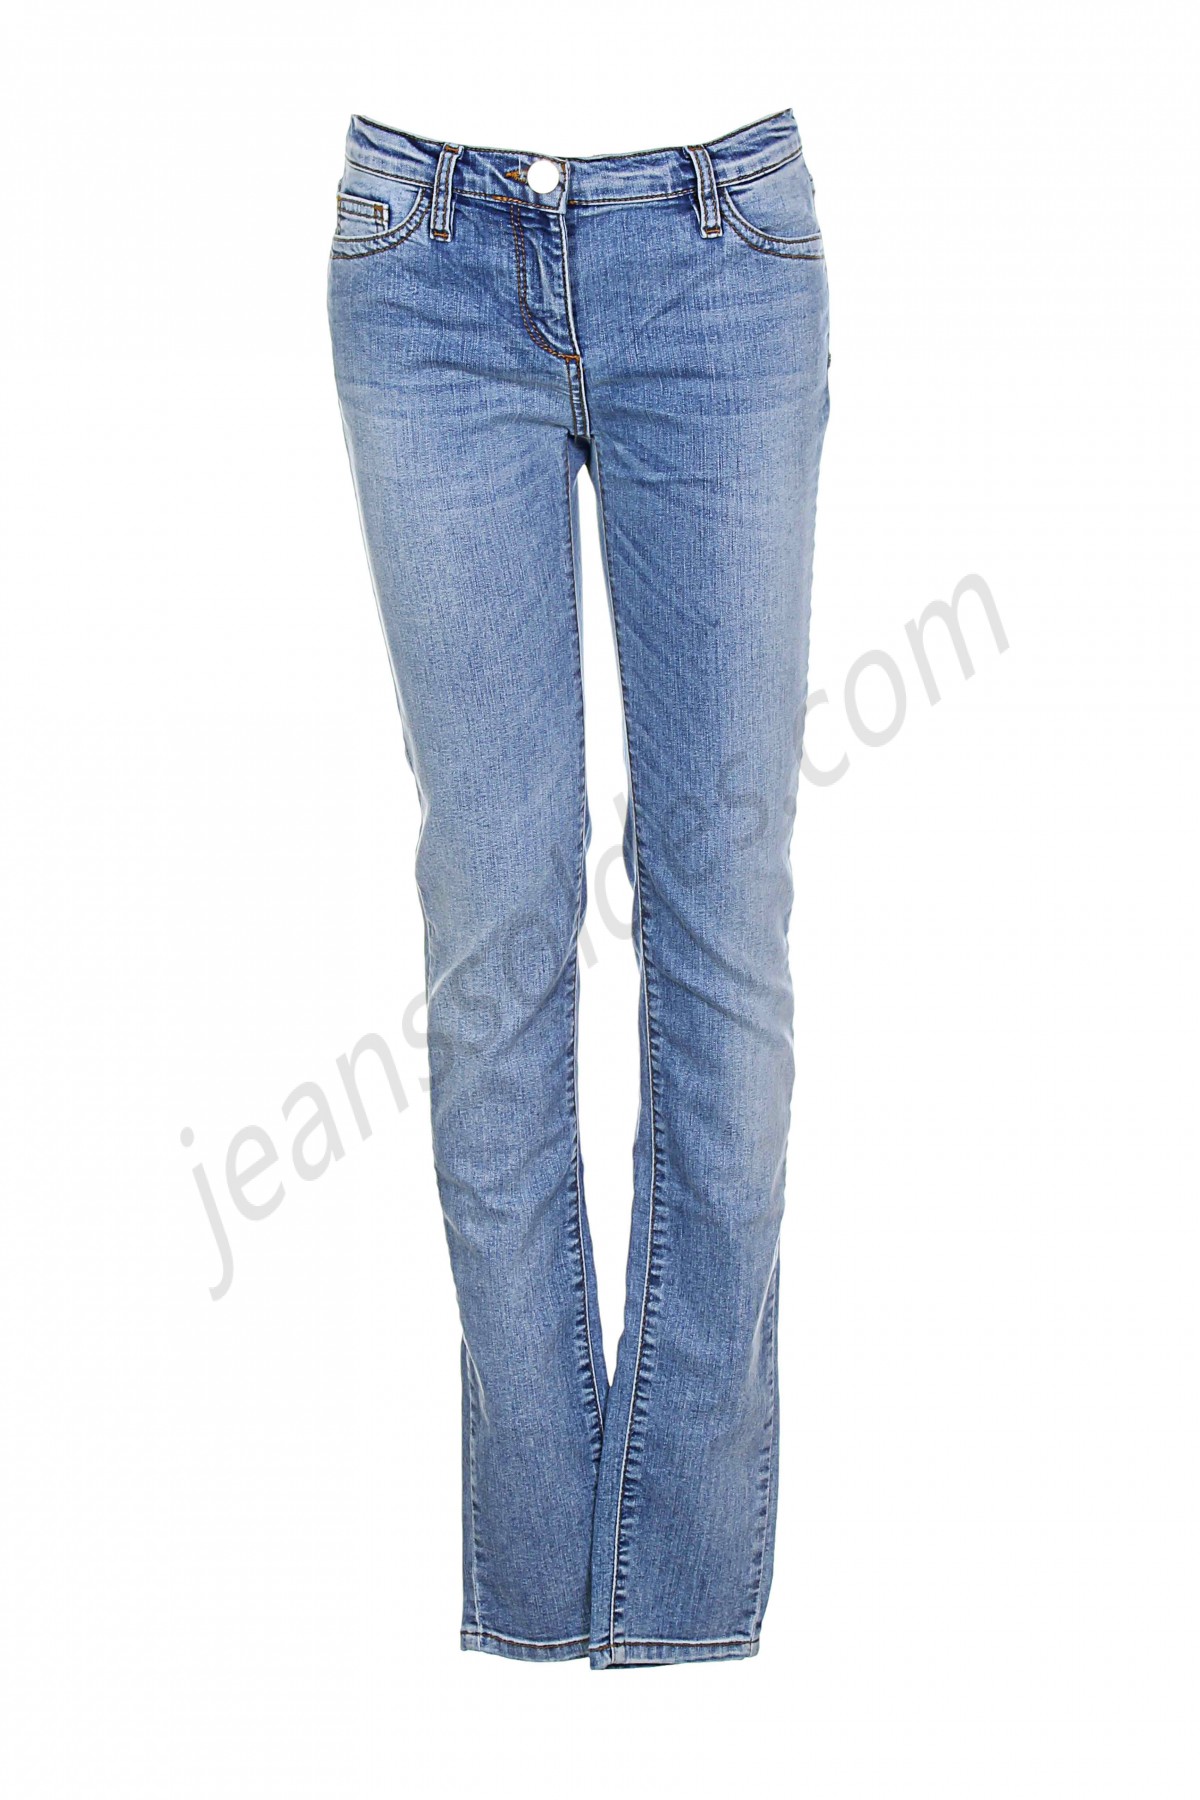 who's who-Jeans coupe slim prix d’amis - -0